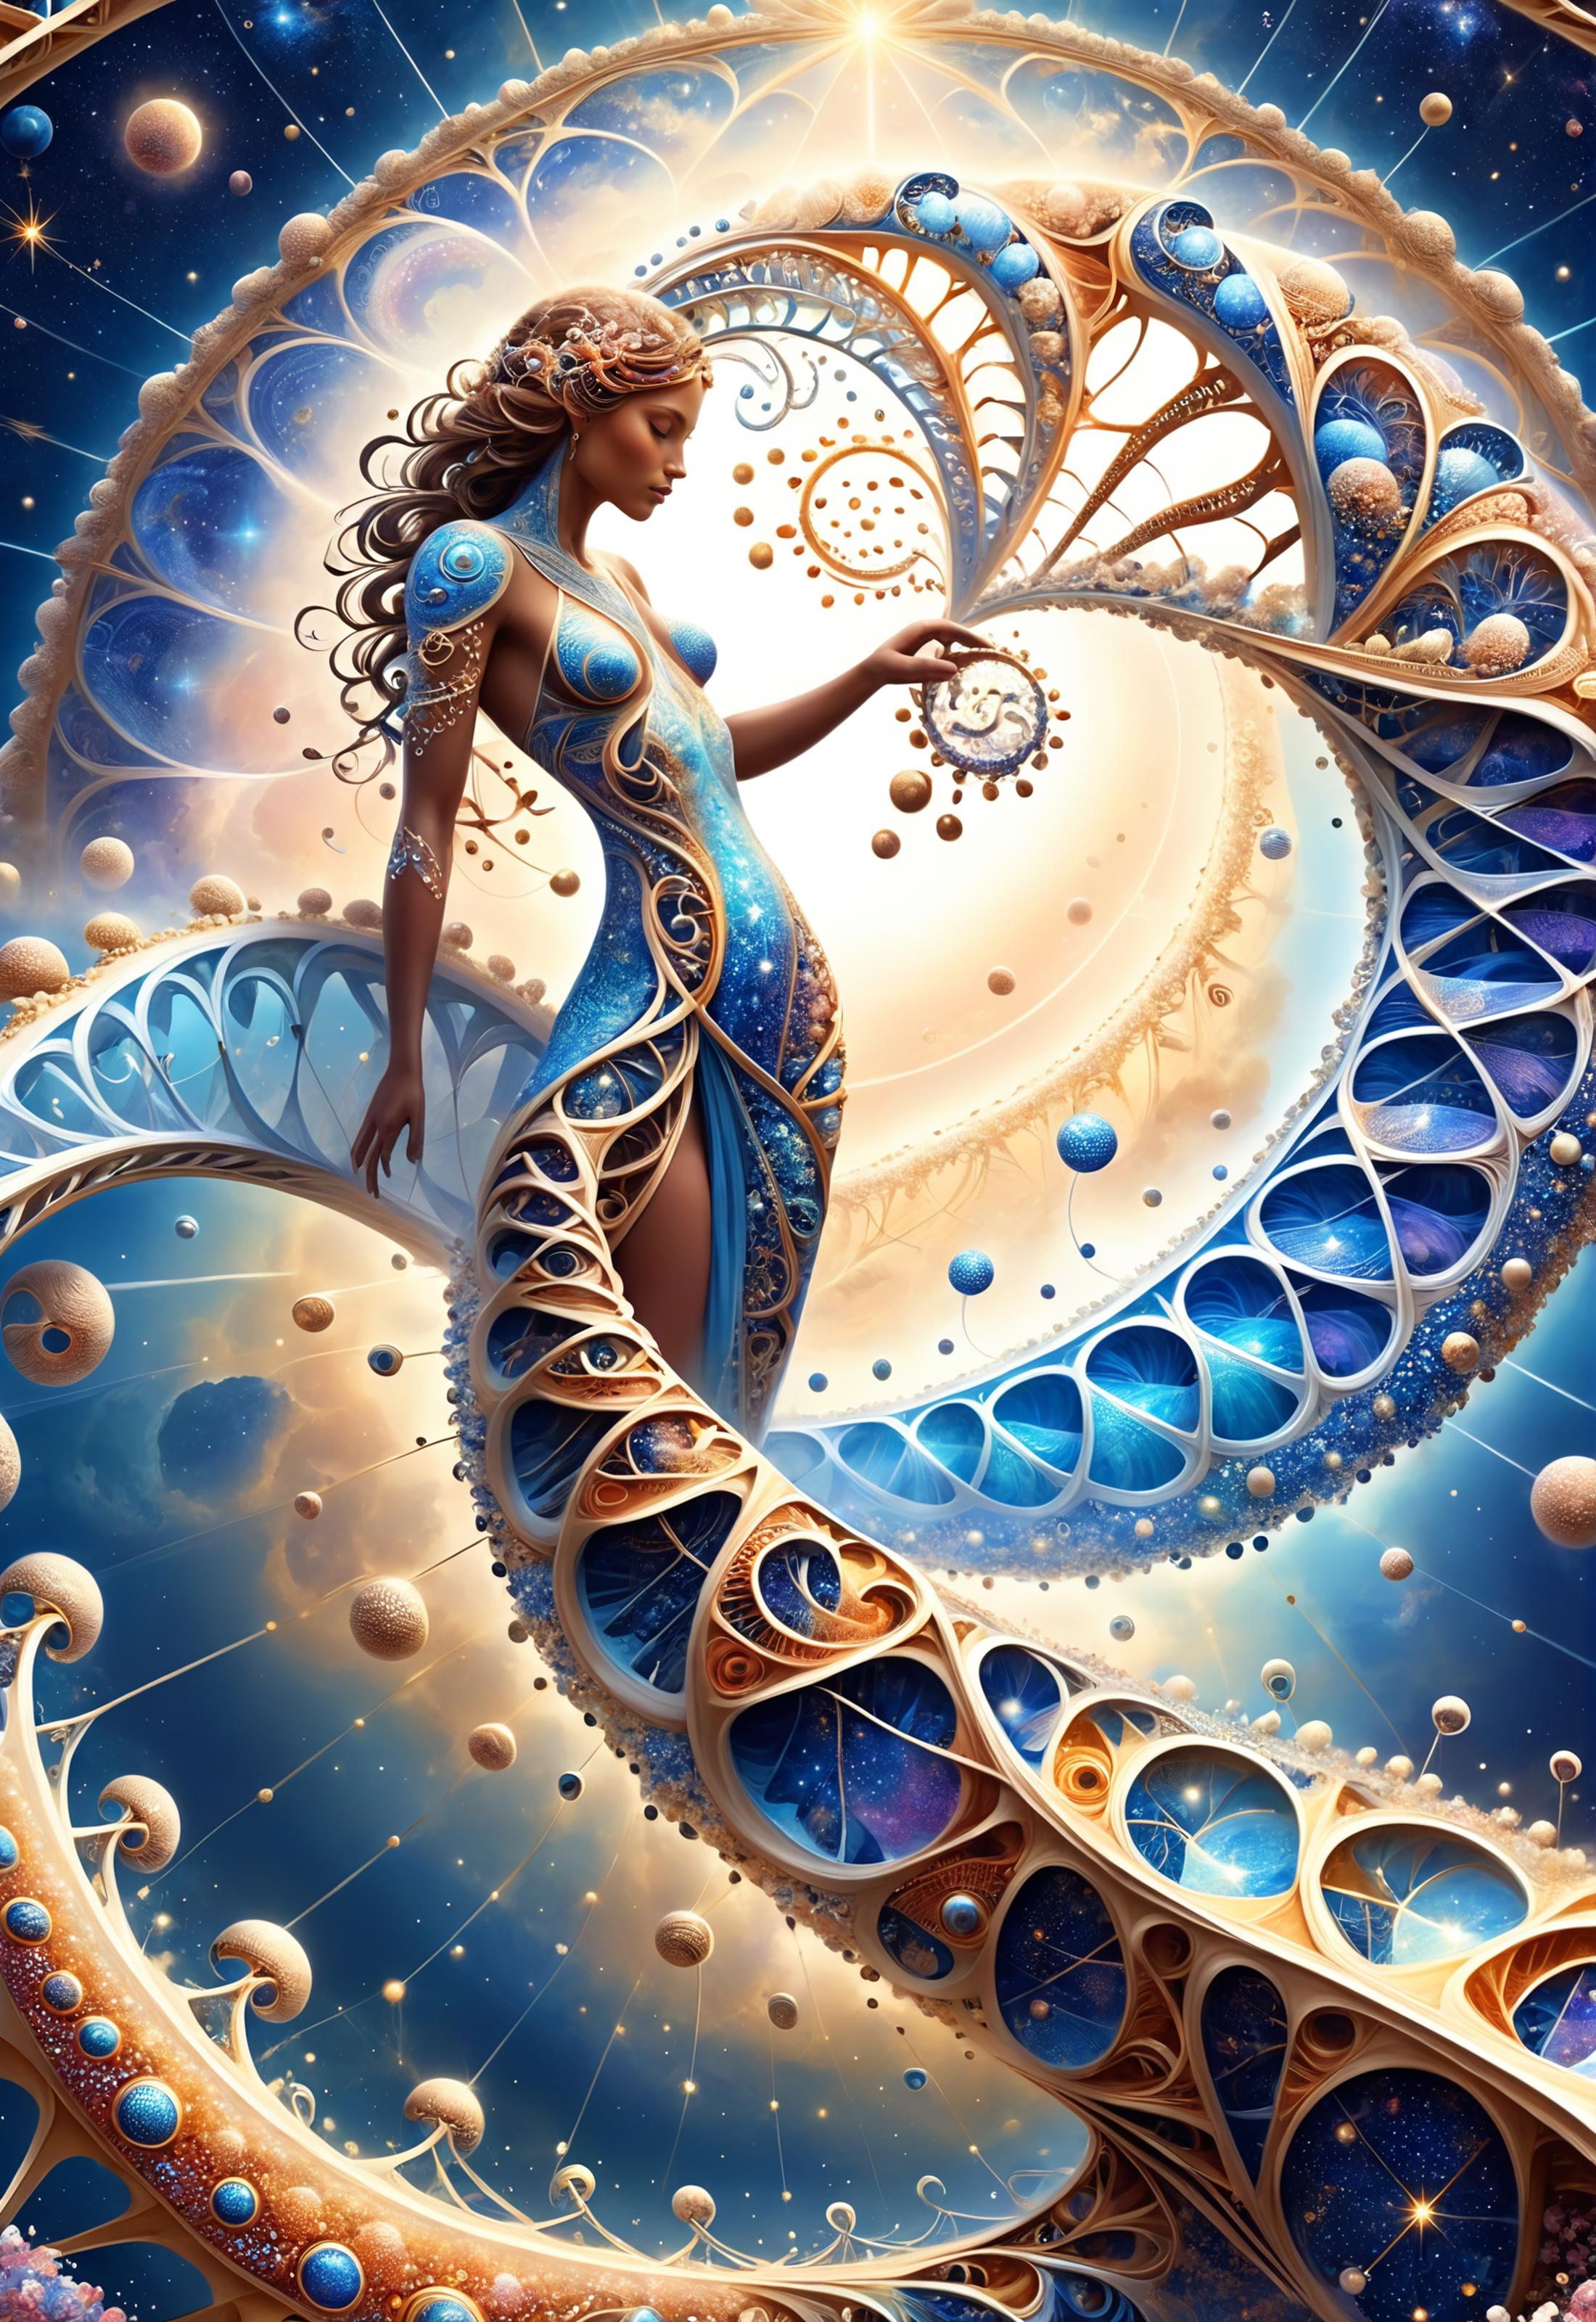 A beautifully rendered artistic image of a woman in a blue dress with a flowing tail.